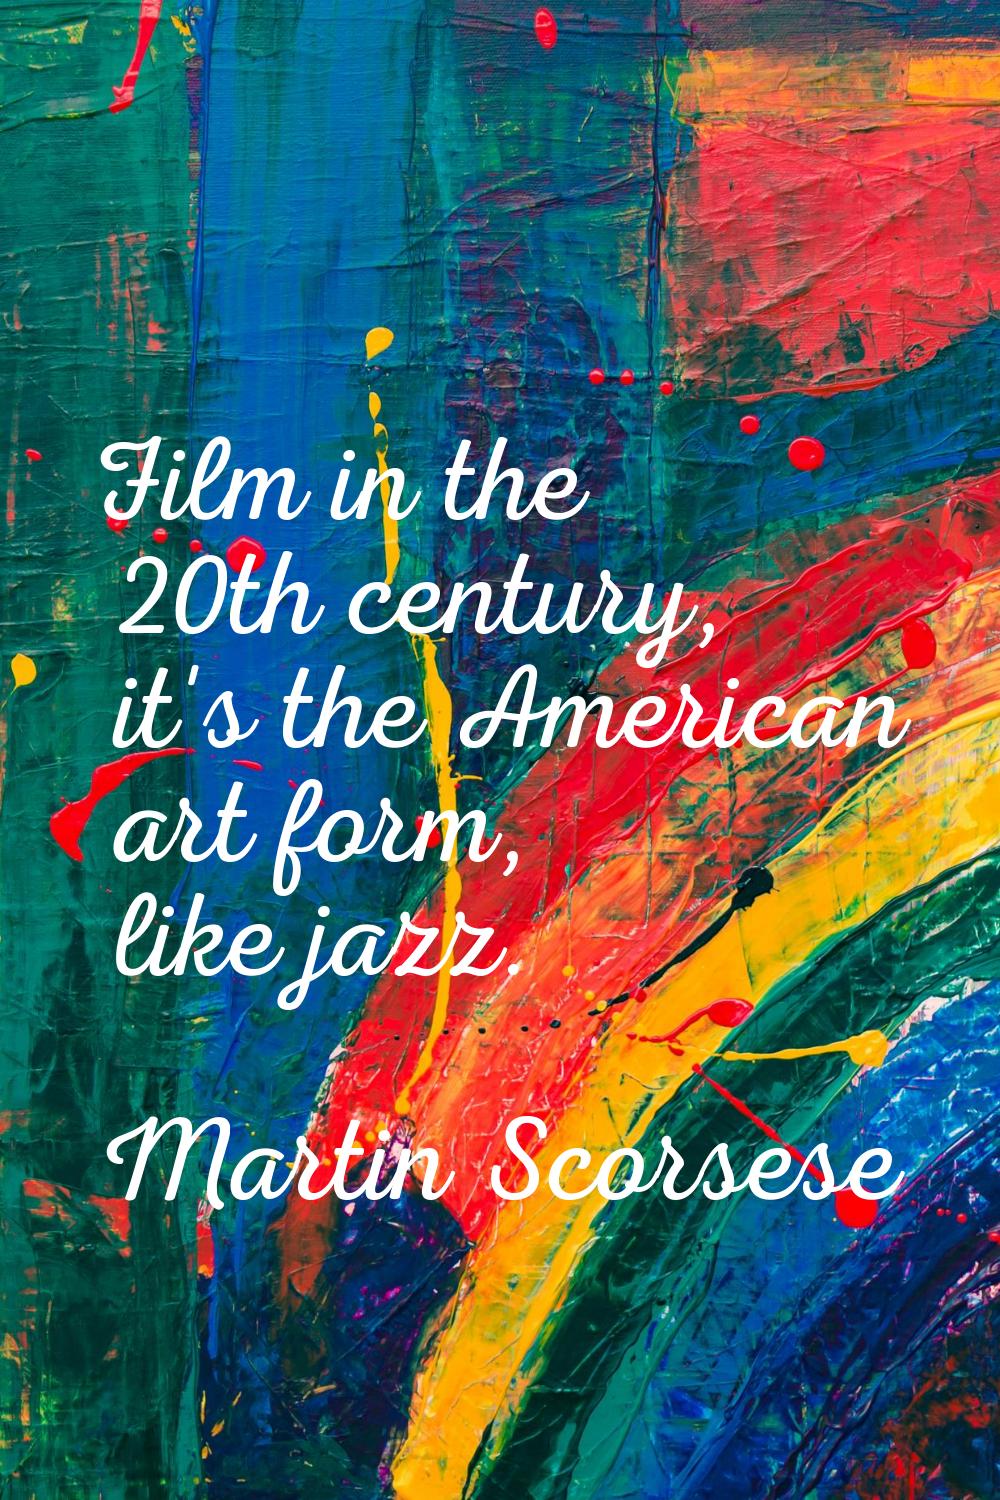 Film in the 20th century, it's the American art form, like jazz.